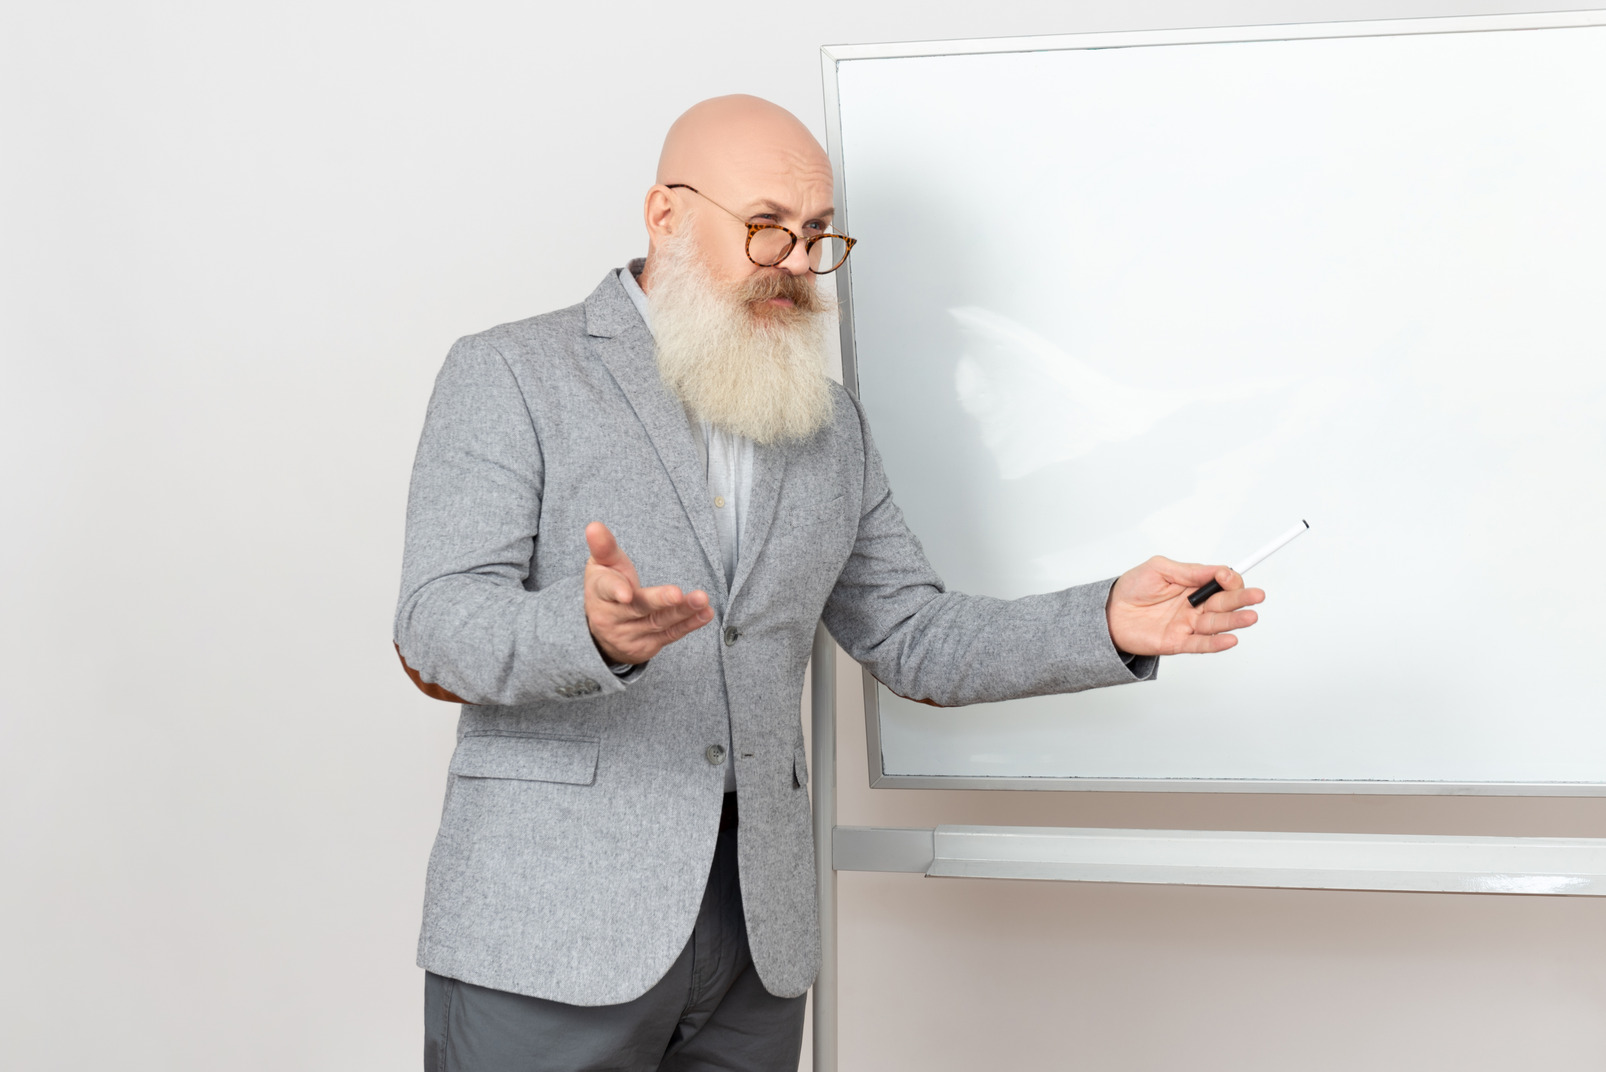 Old professor standind near whiteboard and pointing up with a merker